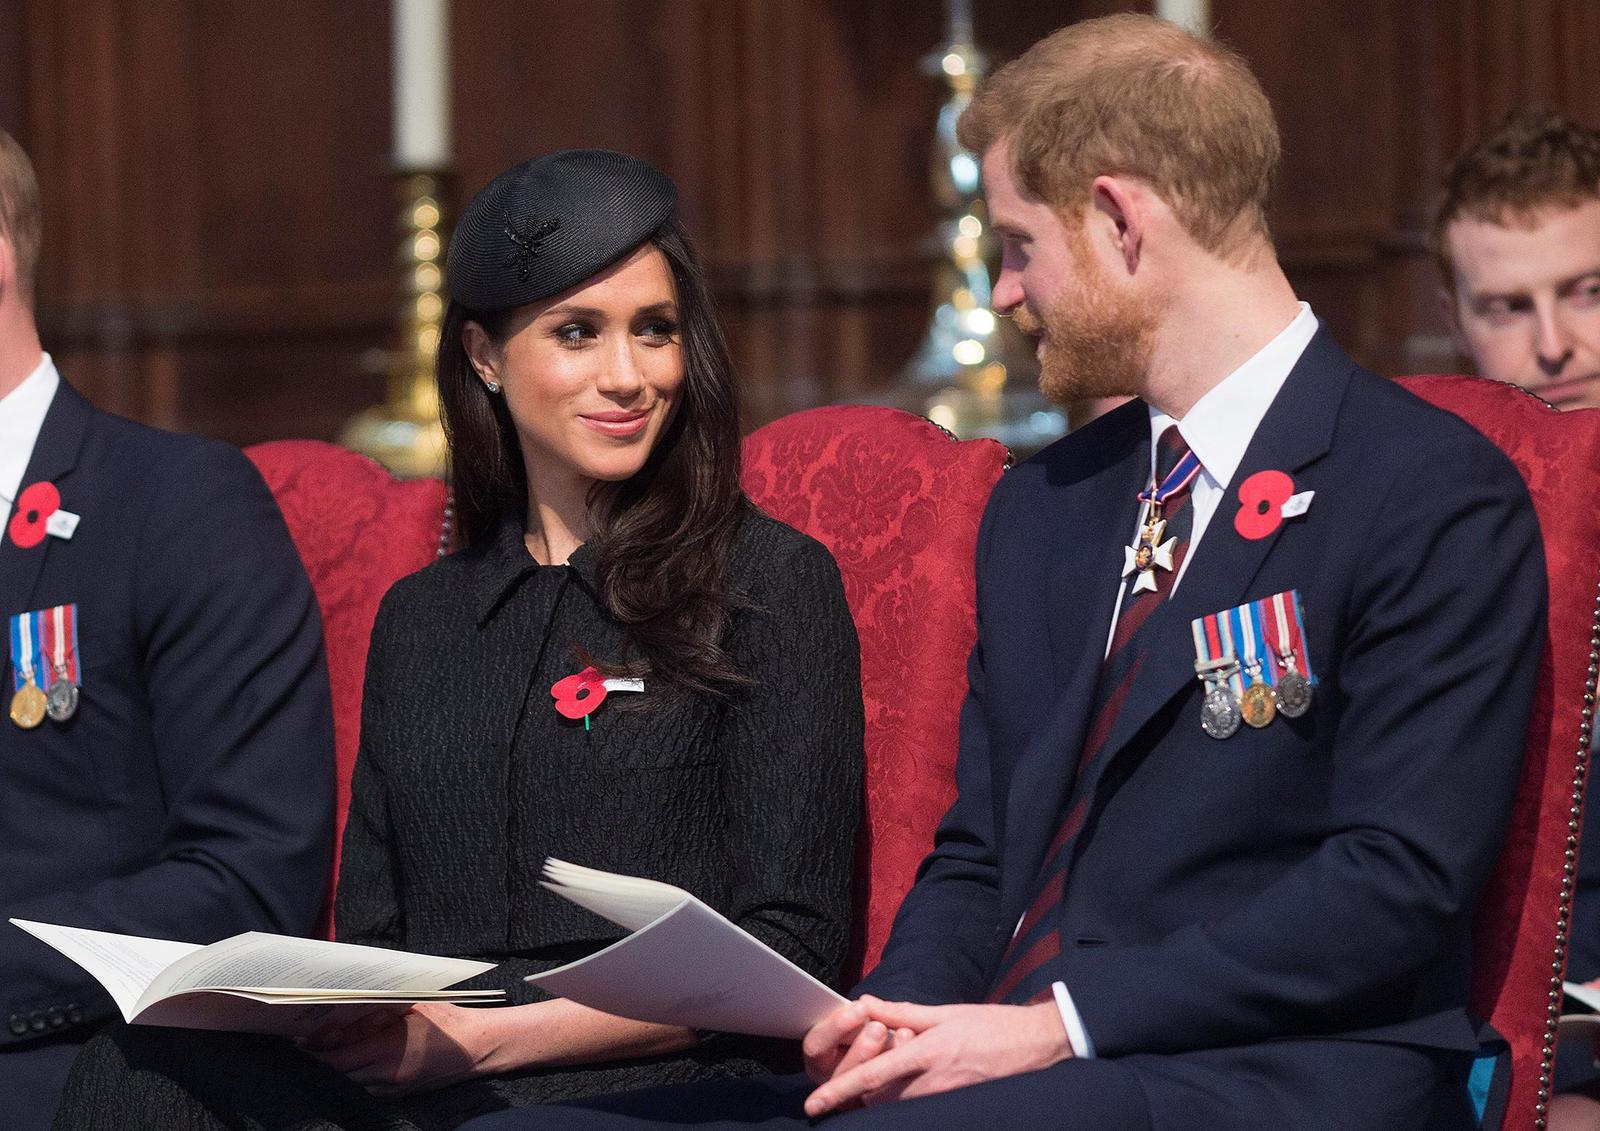 Britain’s Prince Harry and his fiancee Meghan Markle attend a Service of Thanksgiving and Commemoration on ANZAC Day at Westminster Abbey in London